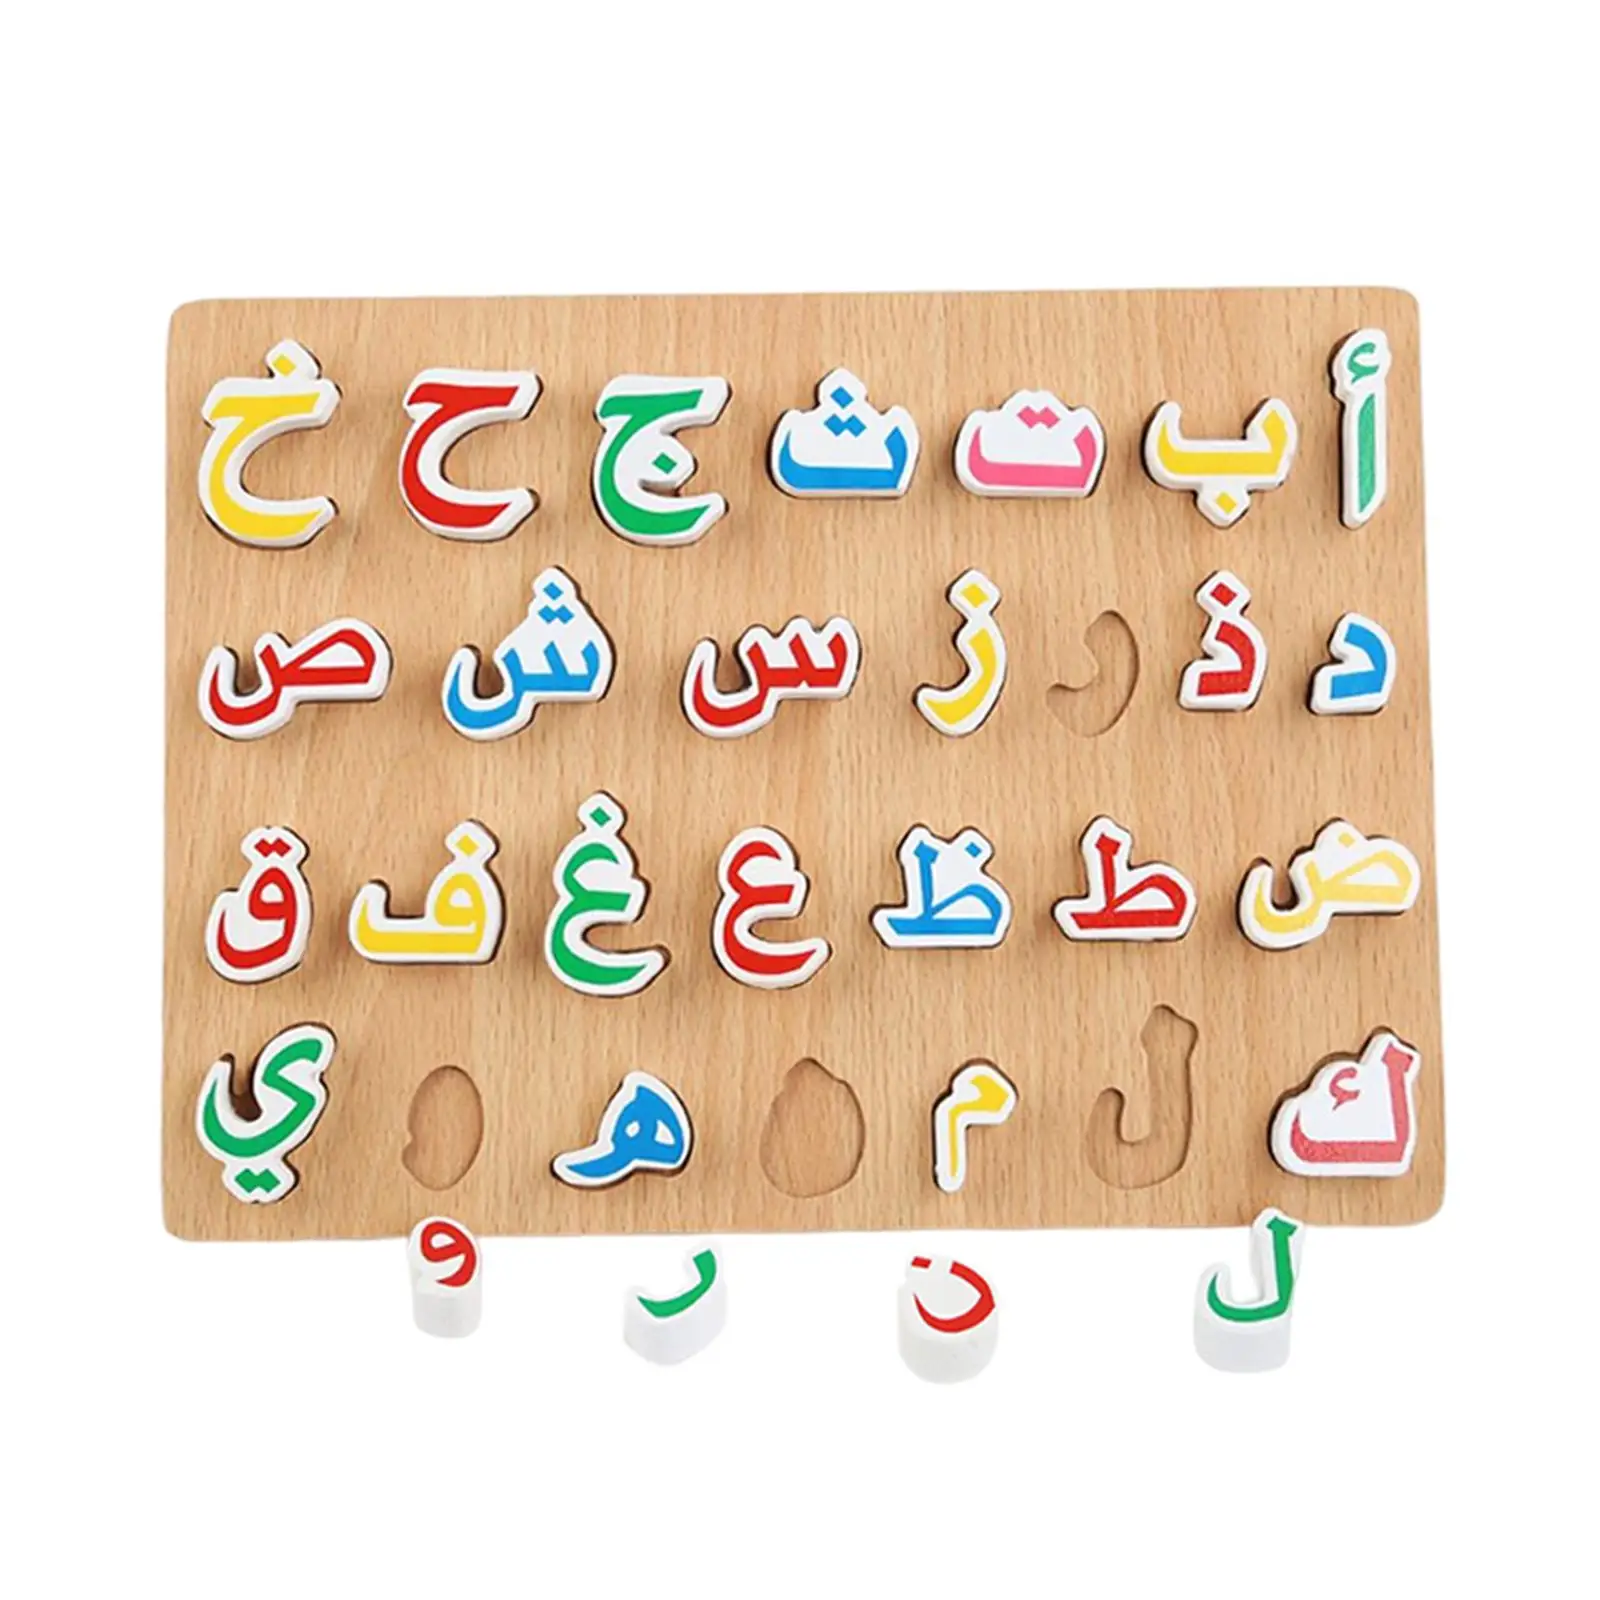 Wooden Toddlers Arabic Alphabet Puzzles Board for Children to Learn Arabic